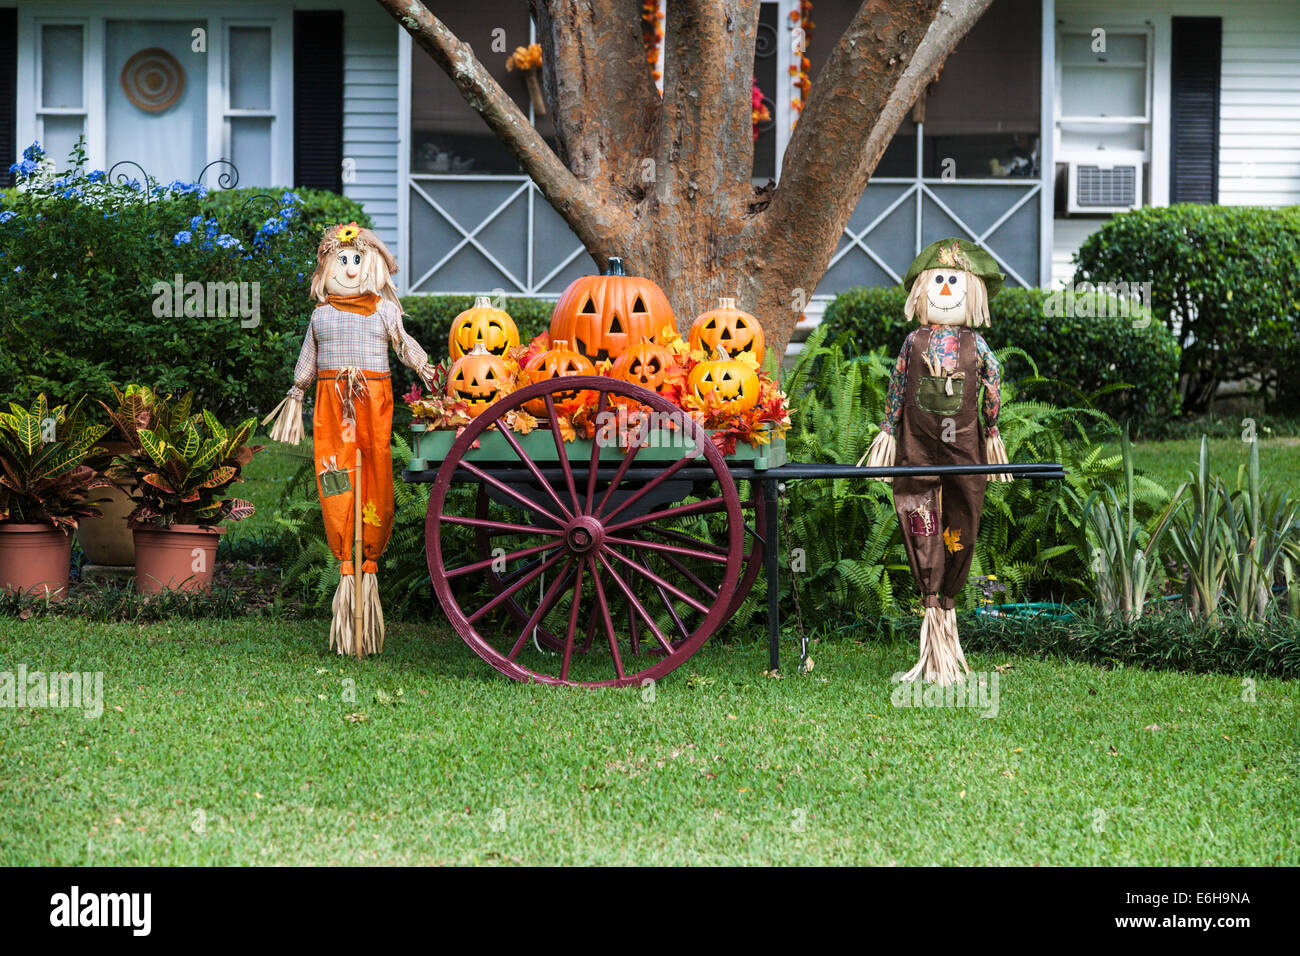 Halloween display of pumpkin jack-o-lanterns and scarecrows on the front lawn of a house Stock Photo